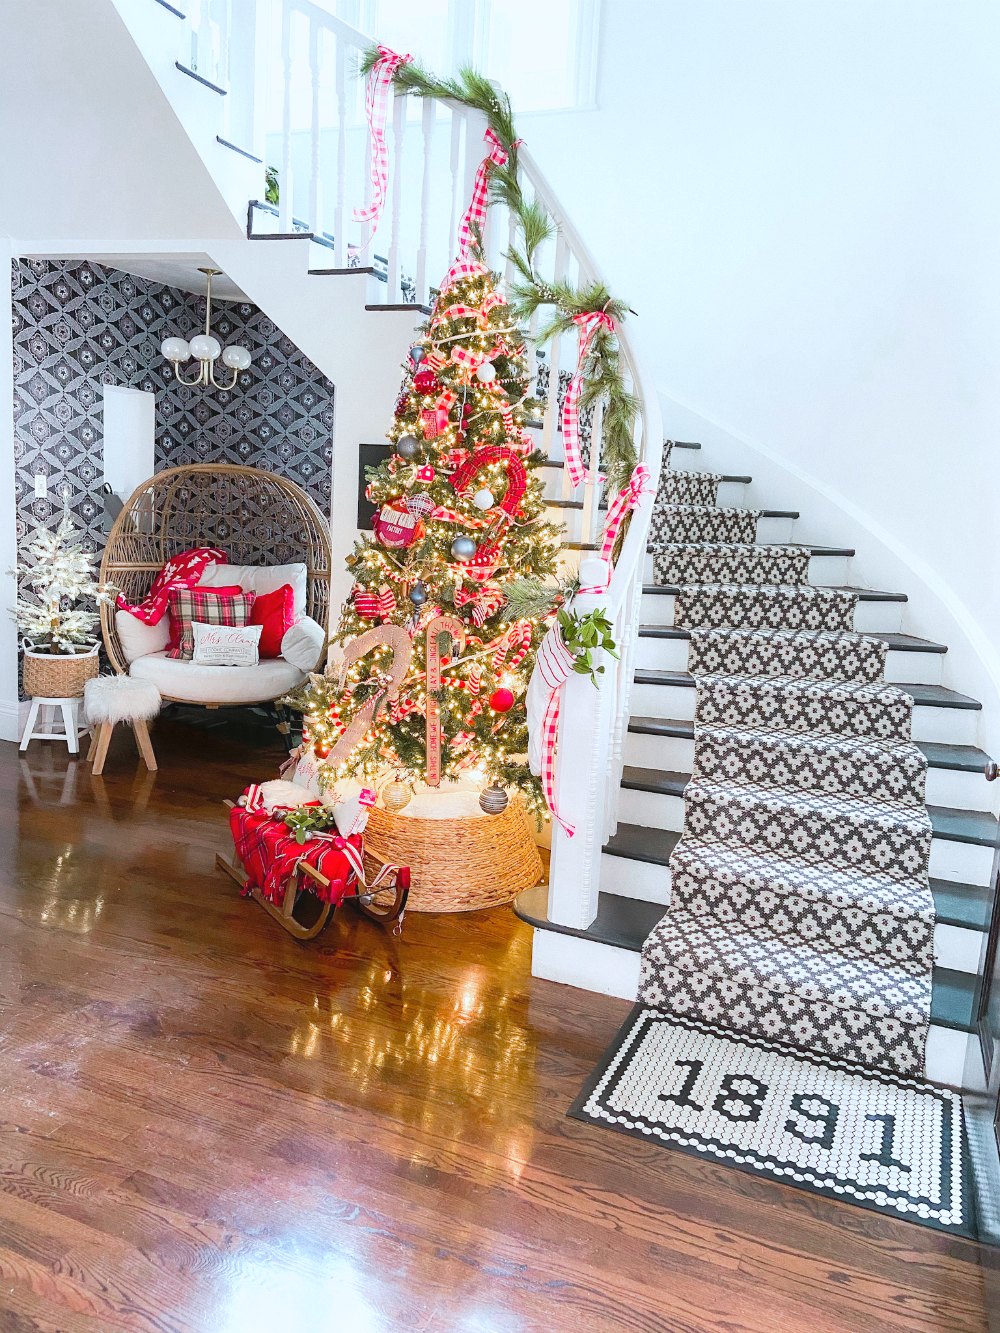 Bright and Colorful Holiday Housewalk Tour. Add bright and happy colors to your home with easy DIY projects to celebrate the holidays.